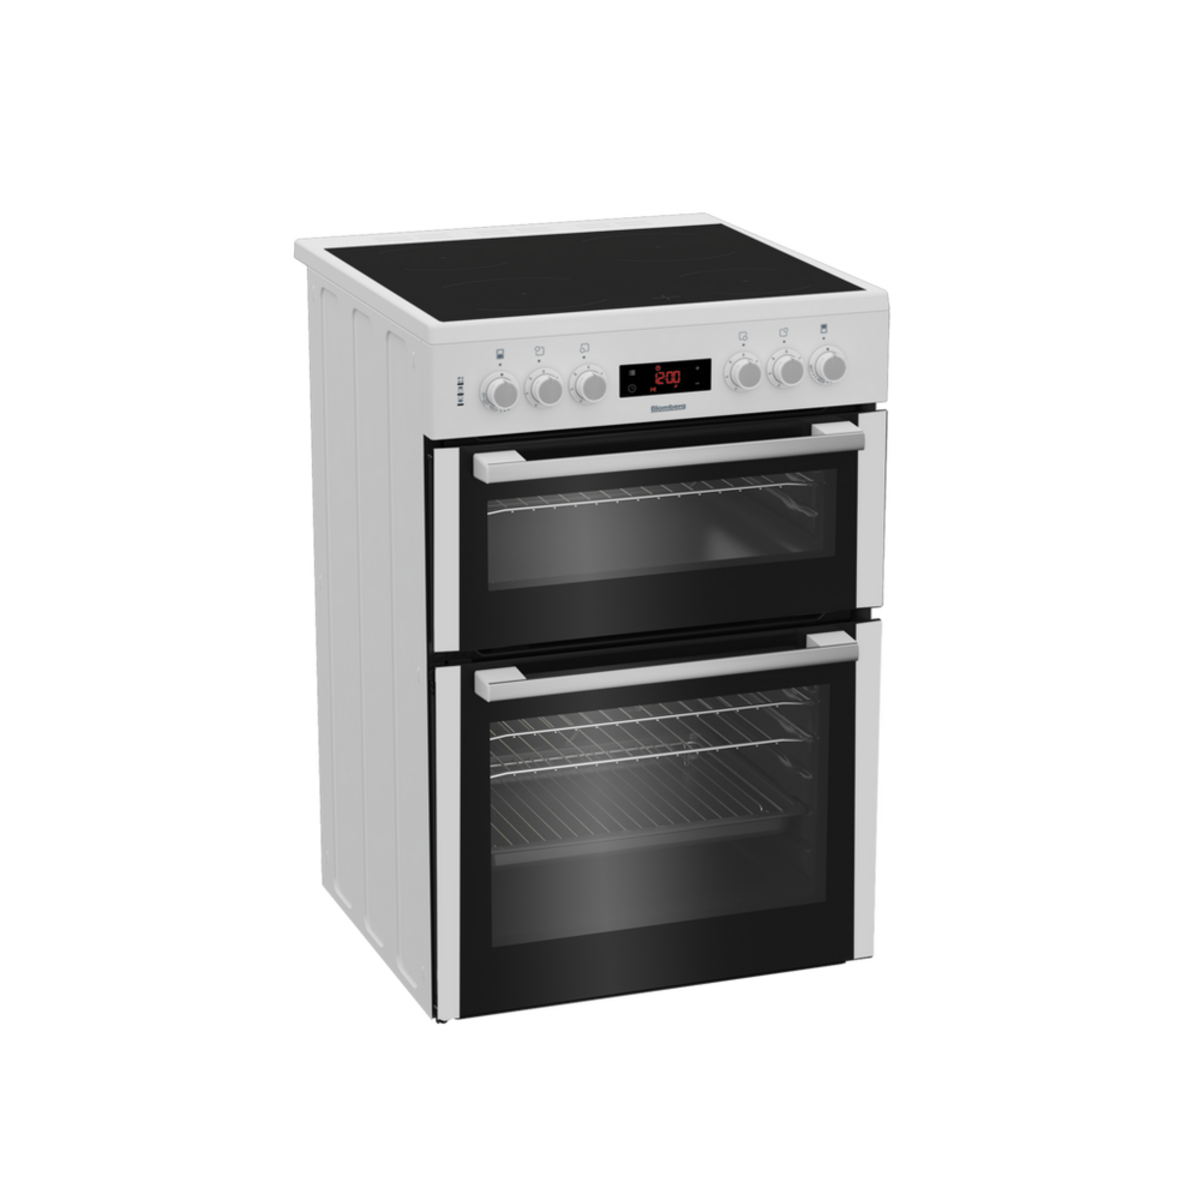 Blomberg HKN65W 60cm Double Oven Electric Cooker in White